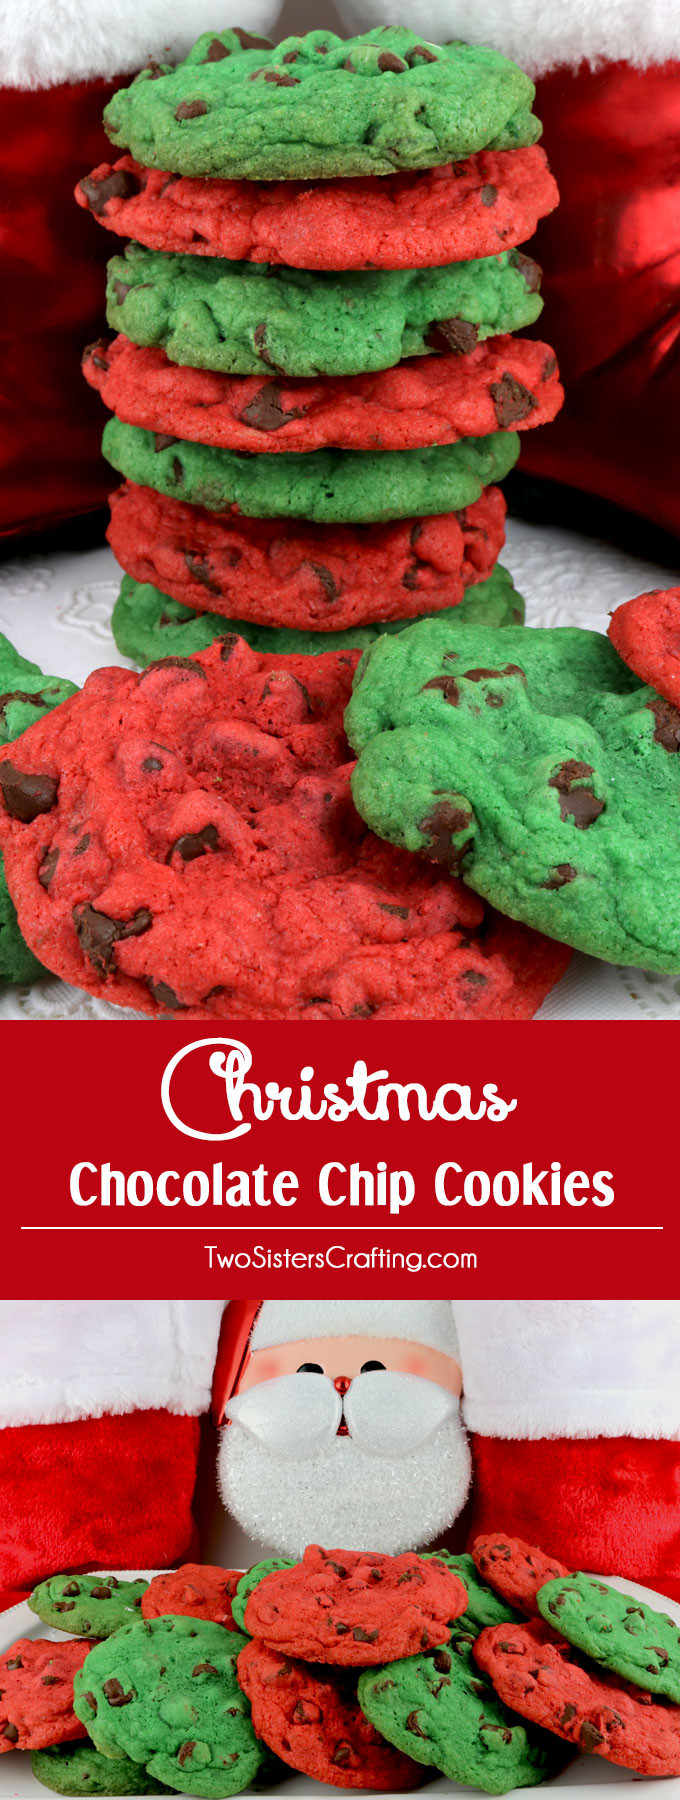 Holiday Chocolate Chip Cookies
 Christmas Chocolate Chip Cookies Two Sisters